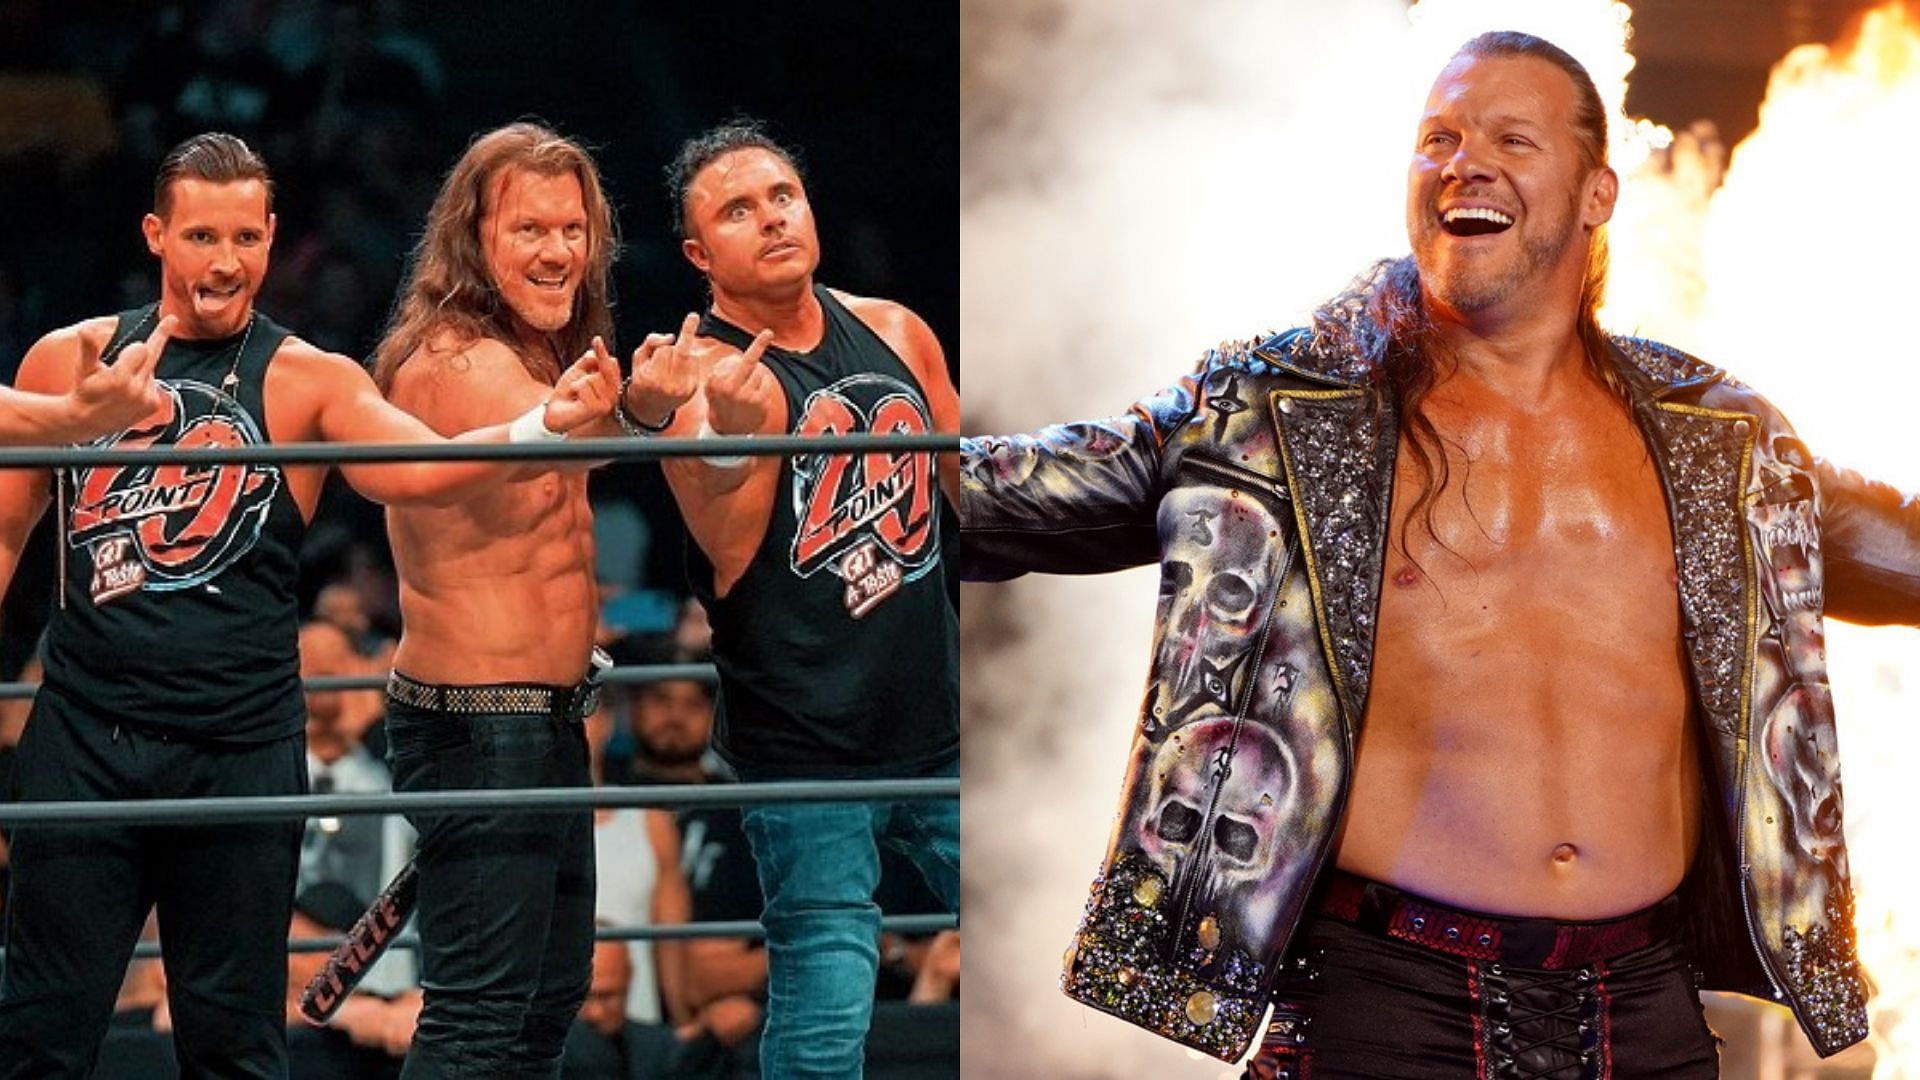 The Jericho Appreciation Society is the latest reinvention from Chris Jericho